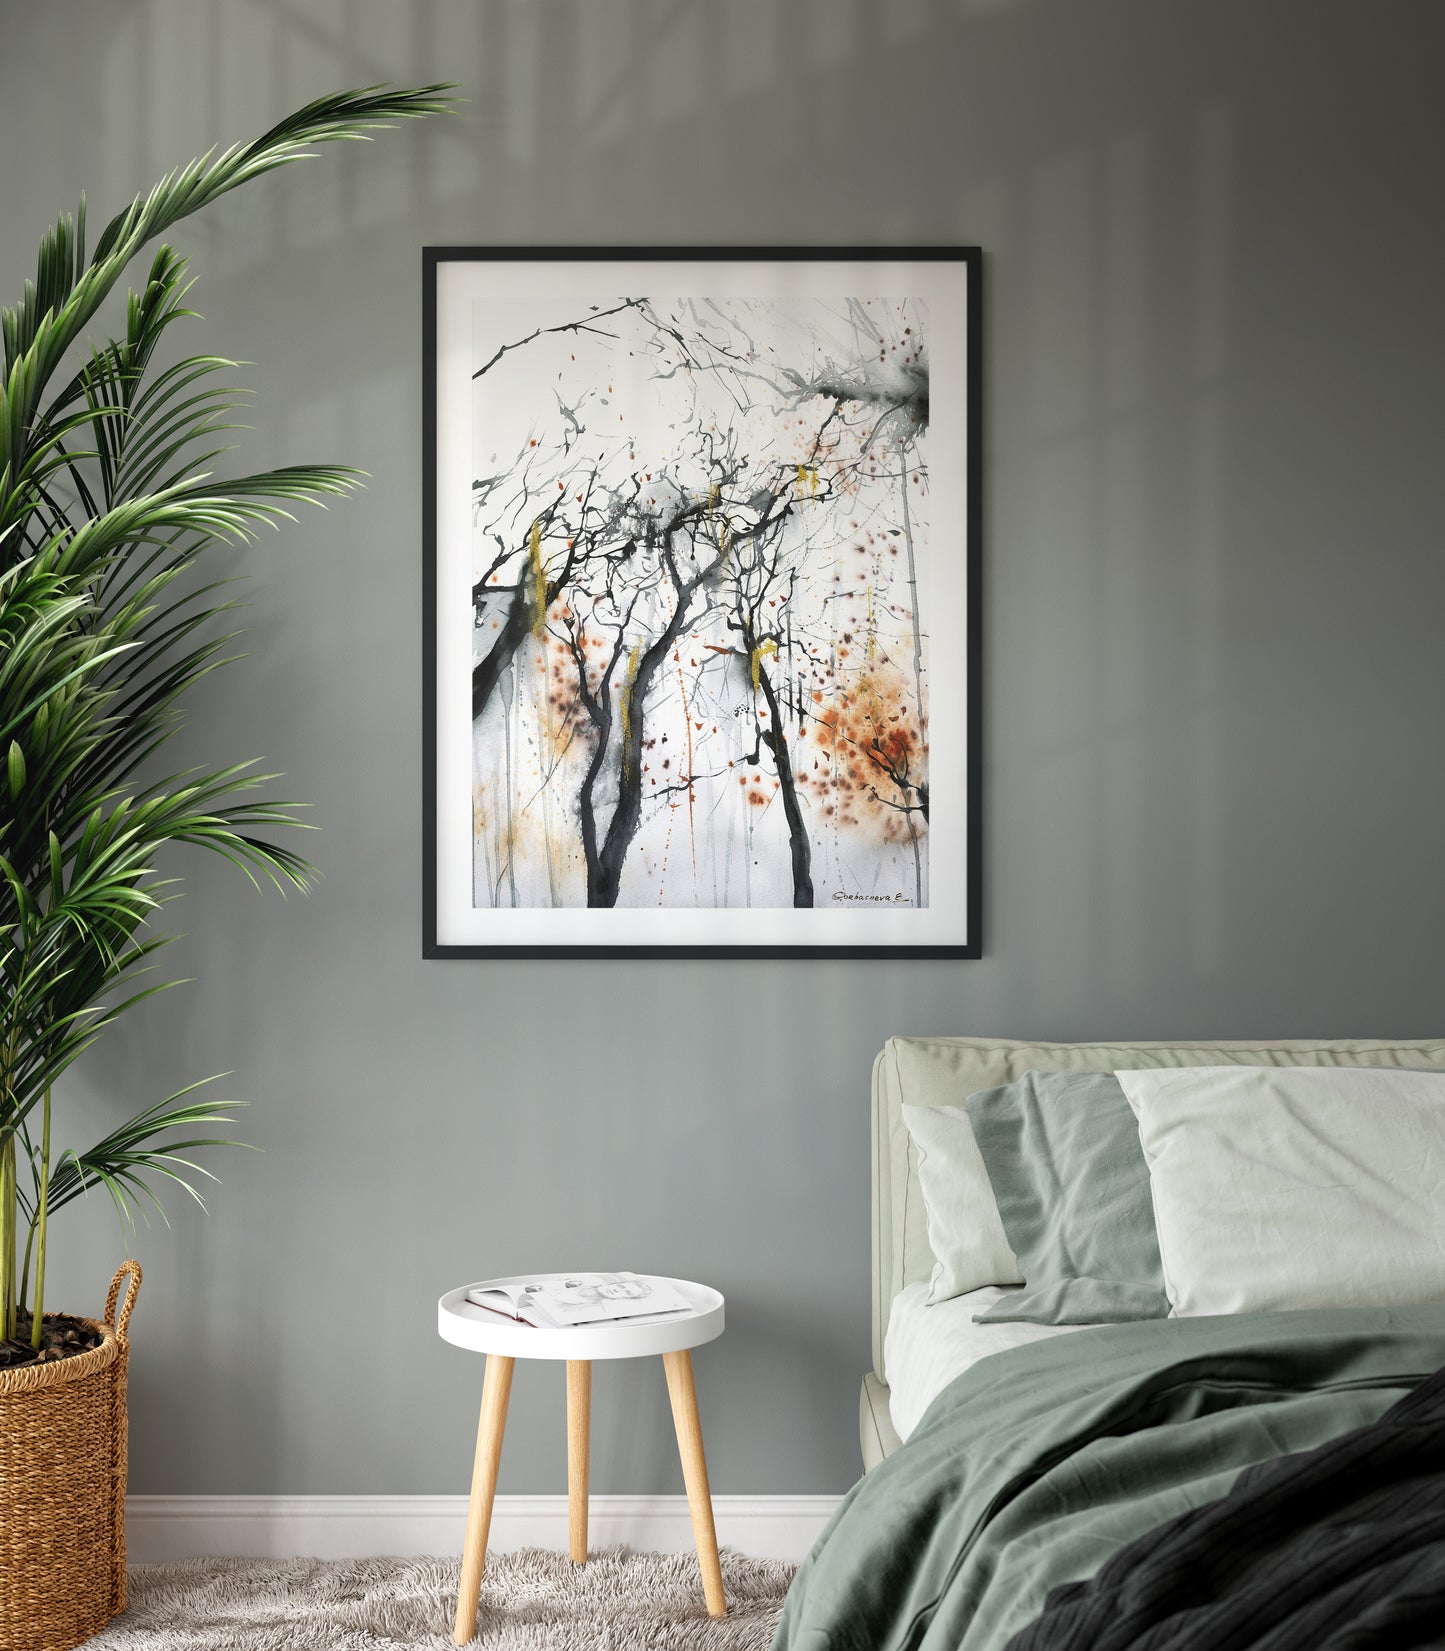 Watercolour Abstract Print, Autumn Dark Forest, Fall Prints, Sienna Wall Art, Landscape Painting, Scary Surreal Poster